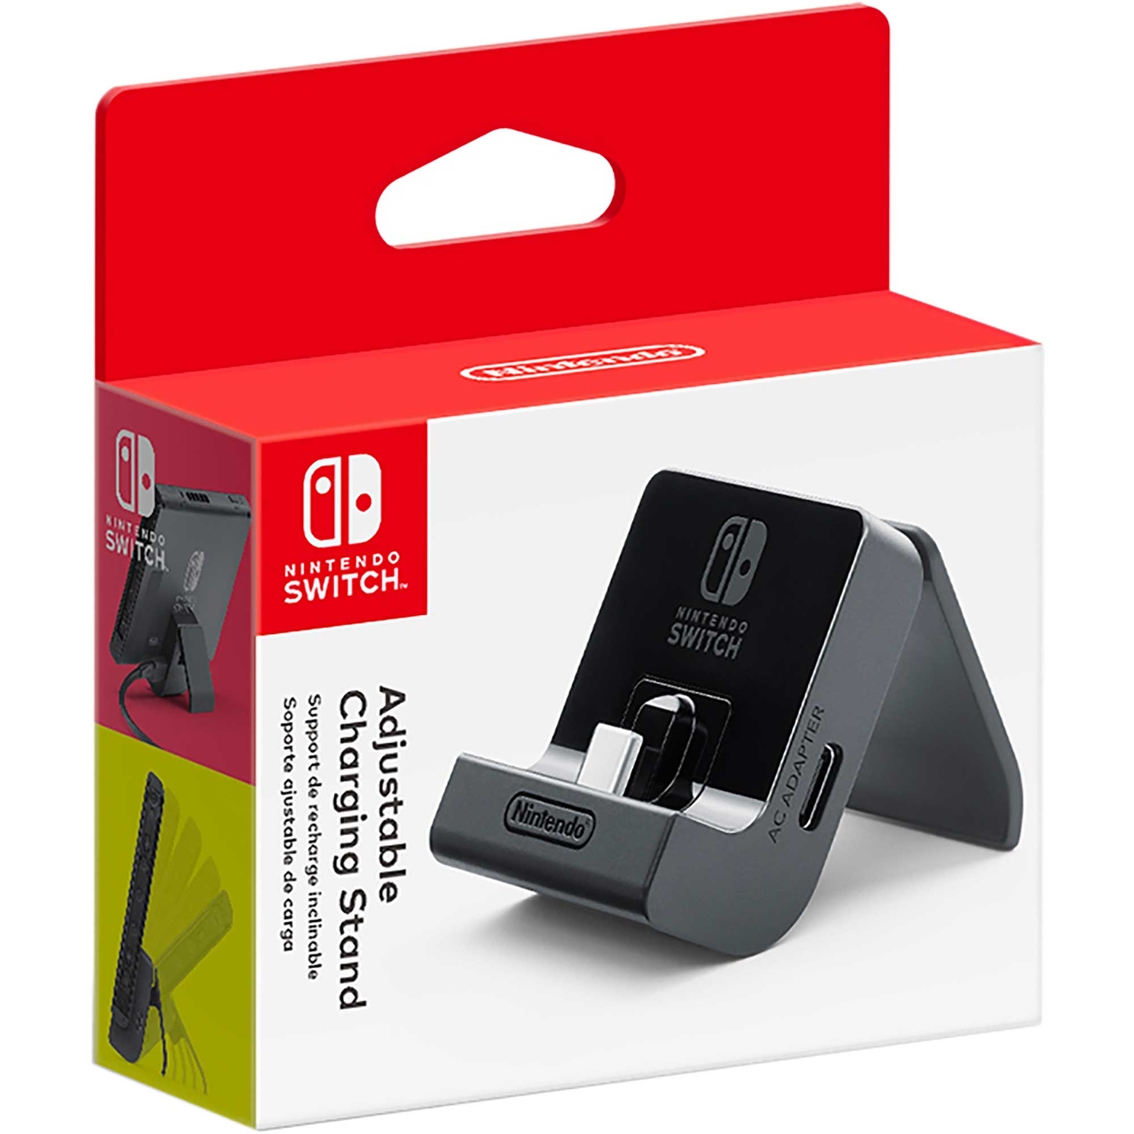 Nintendo Switch Adjustable Charging Stand - Image 2 of 2